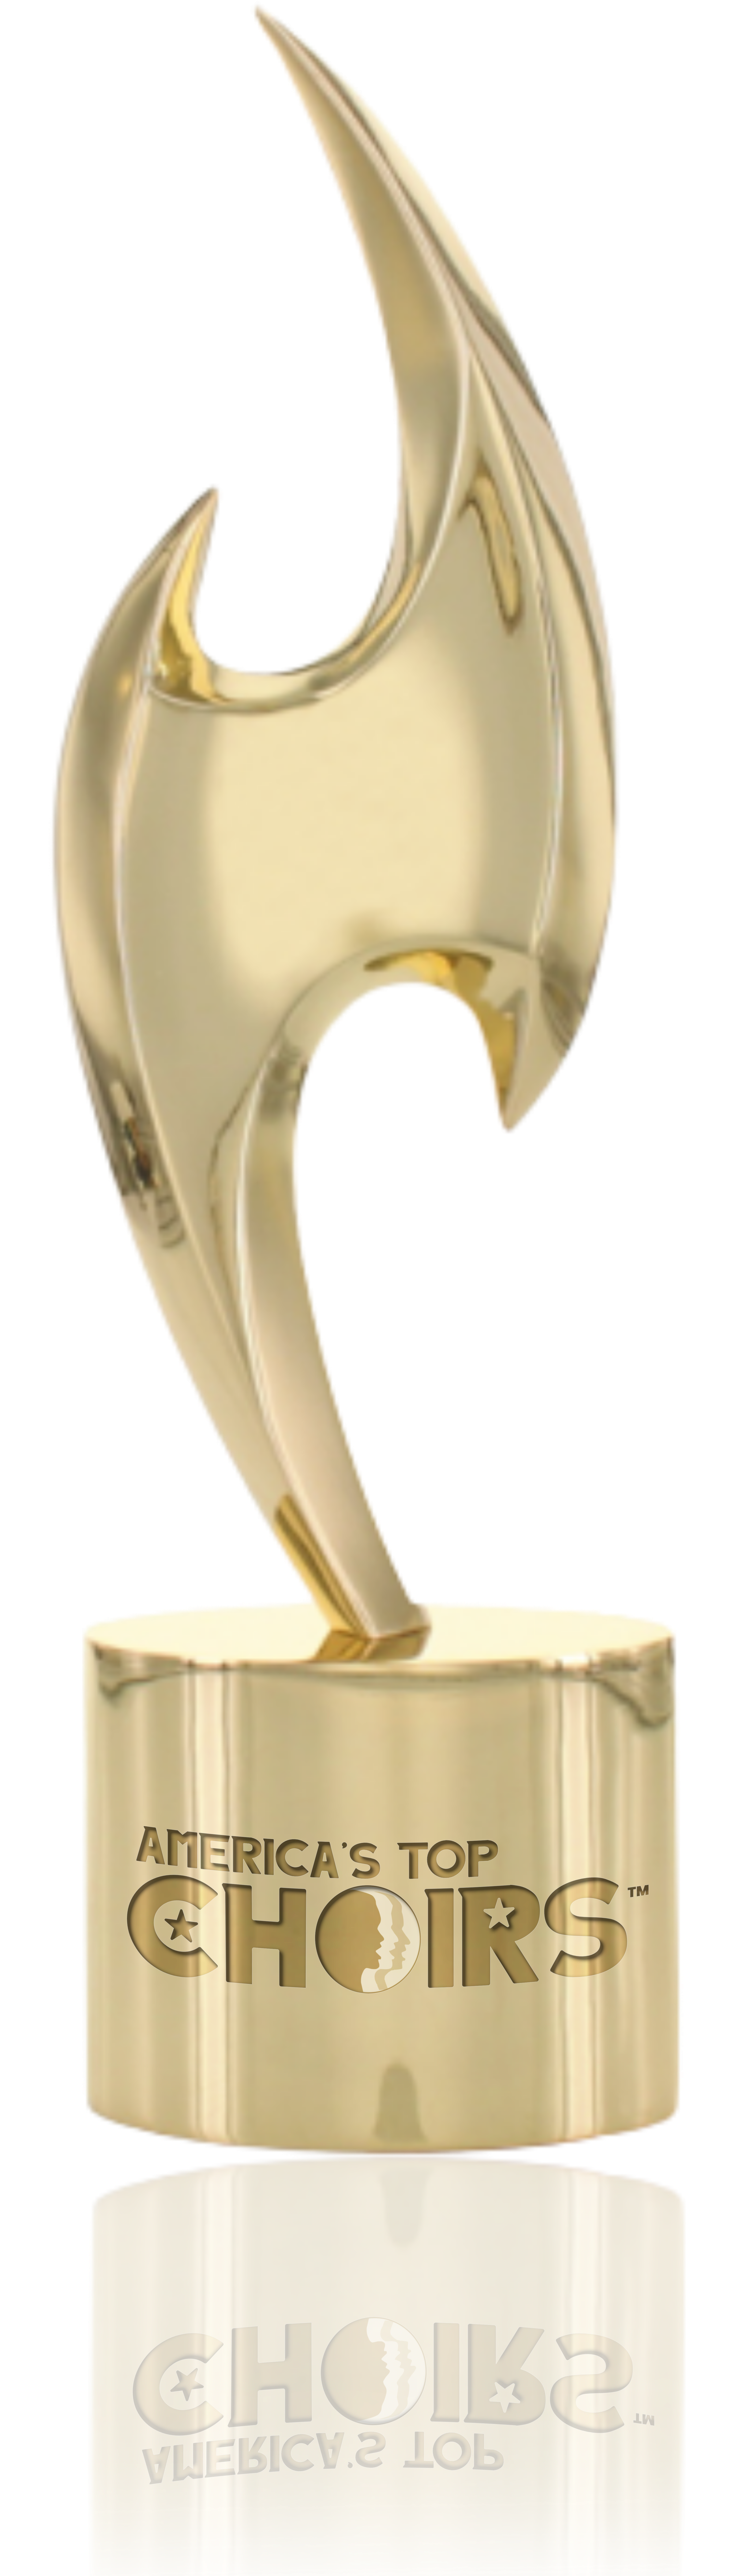 ATC Main Trophy with shadow